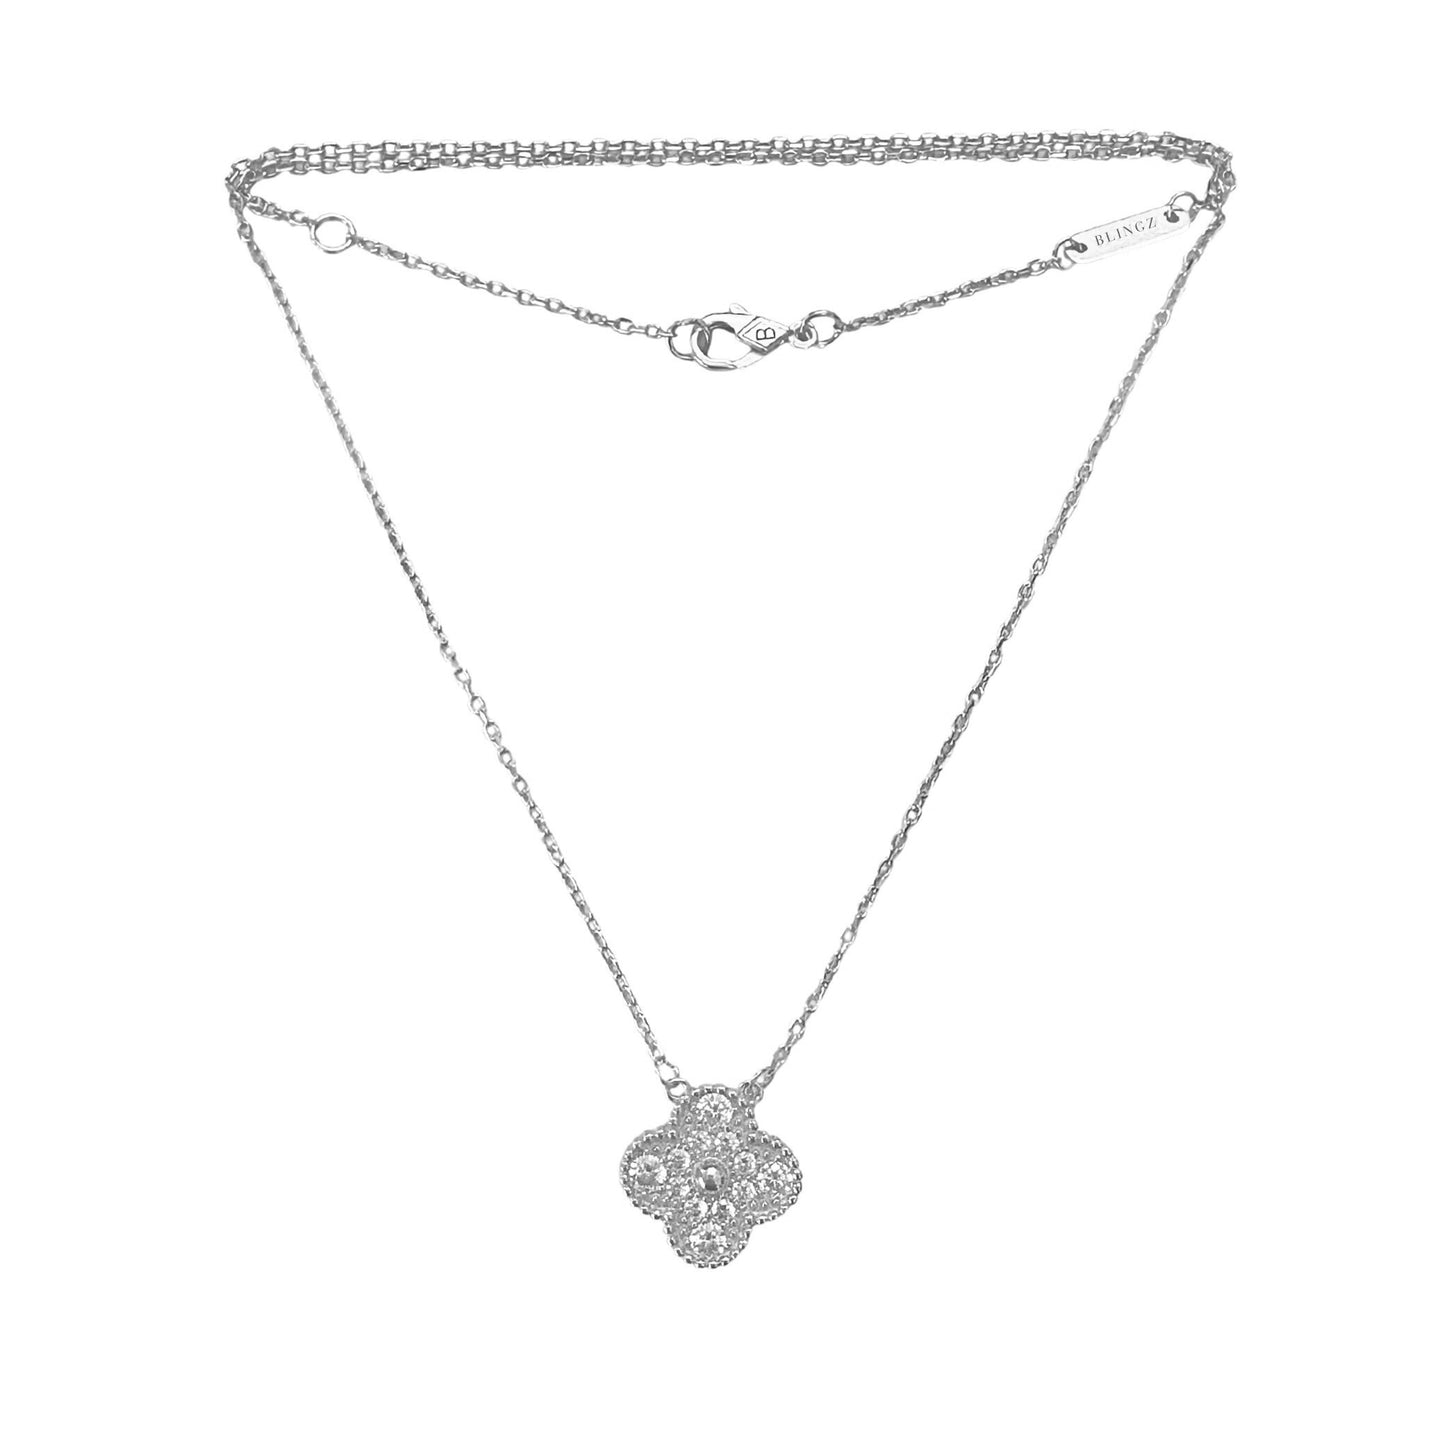 CRYSTELLE CLOVER NECKLACE - SILVER